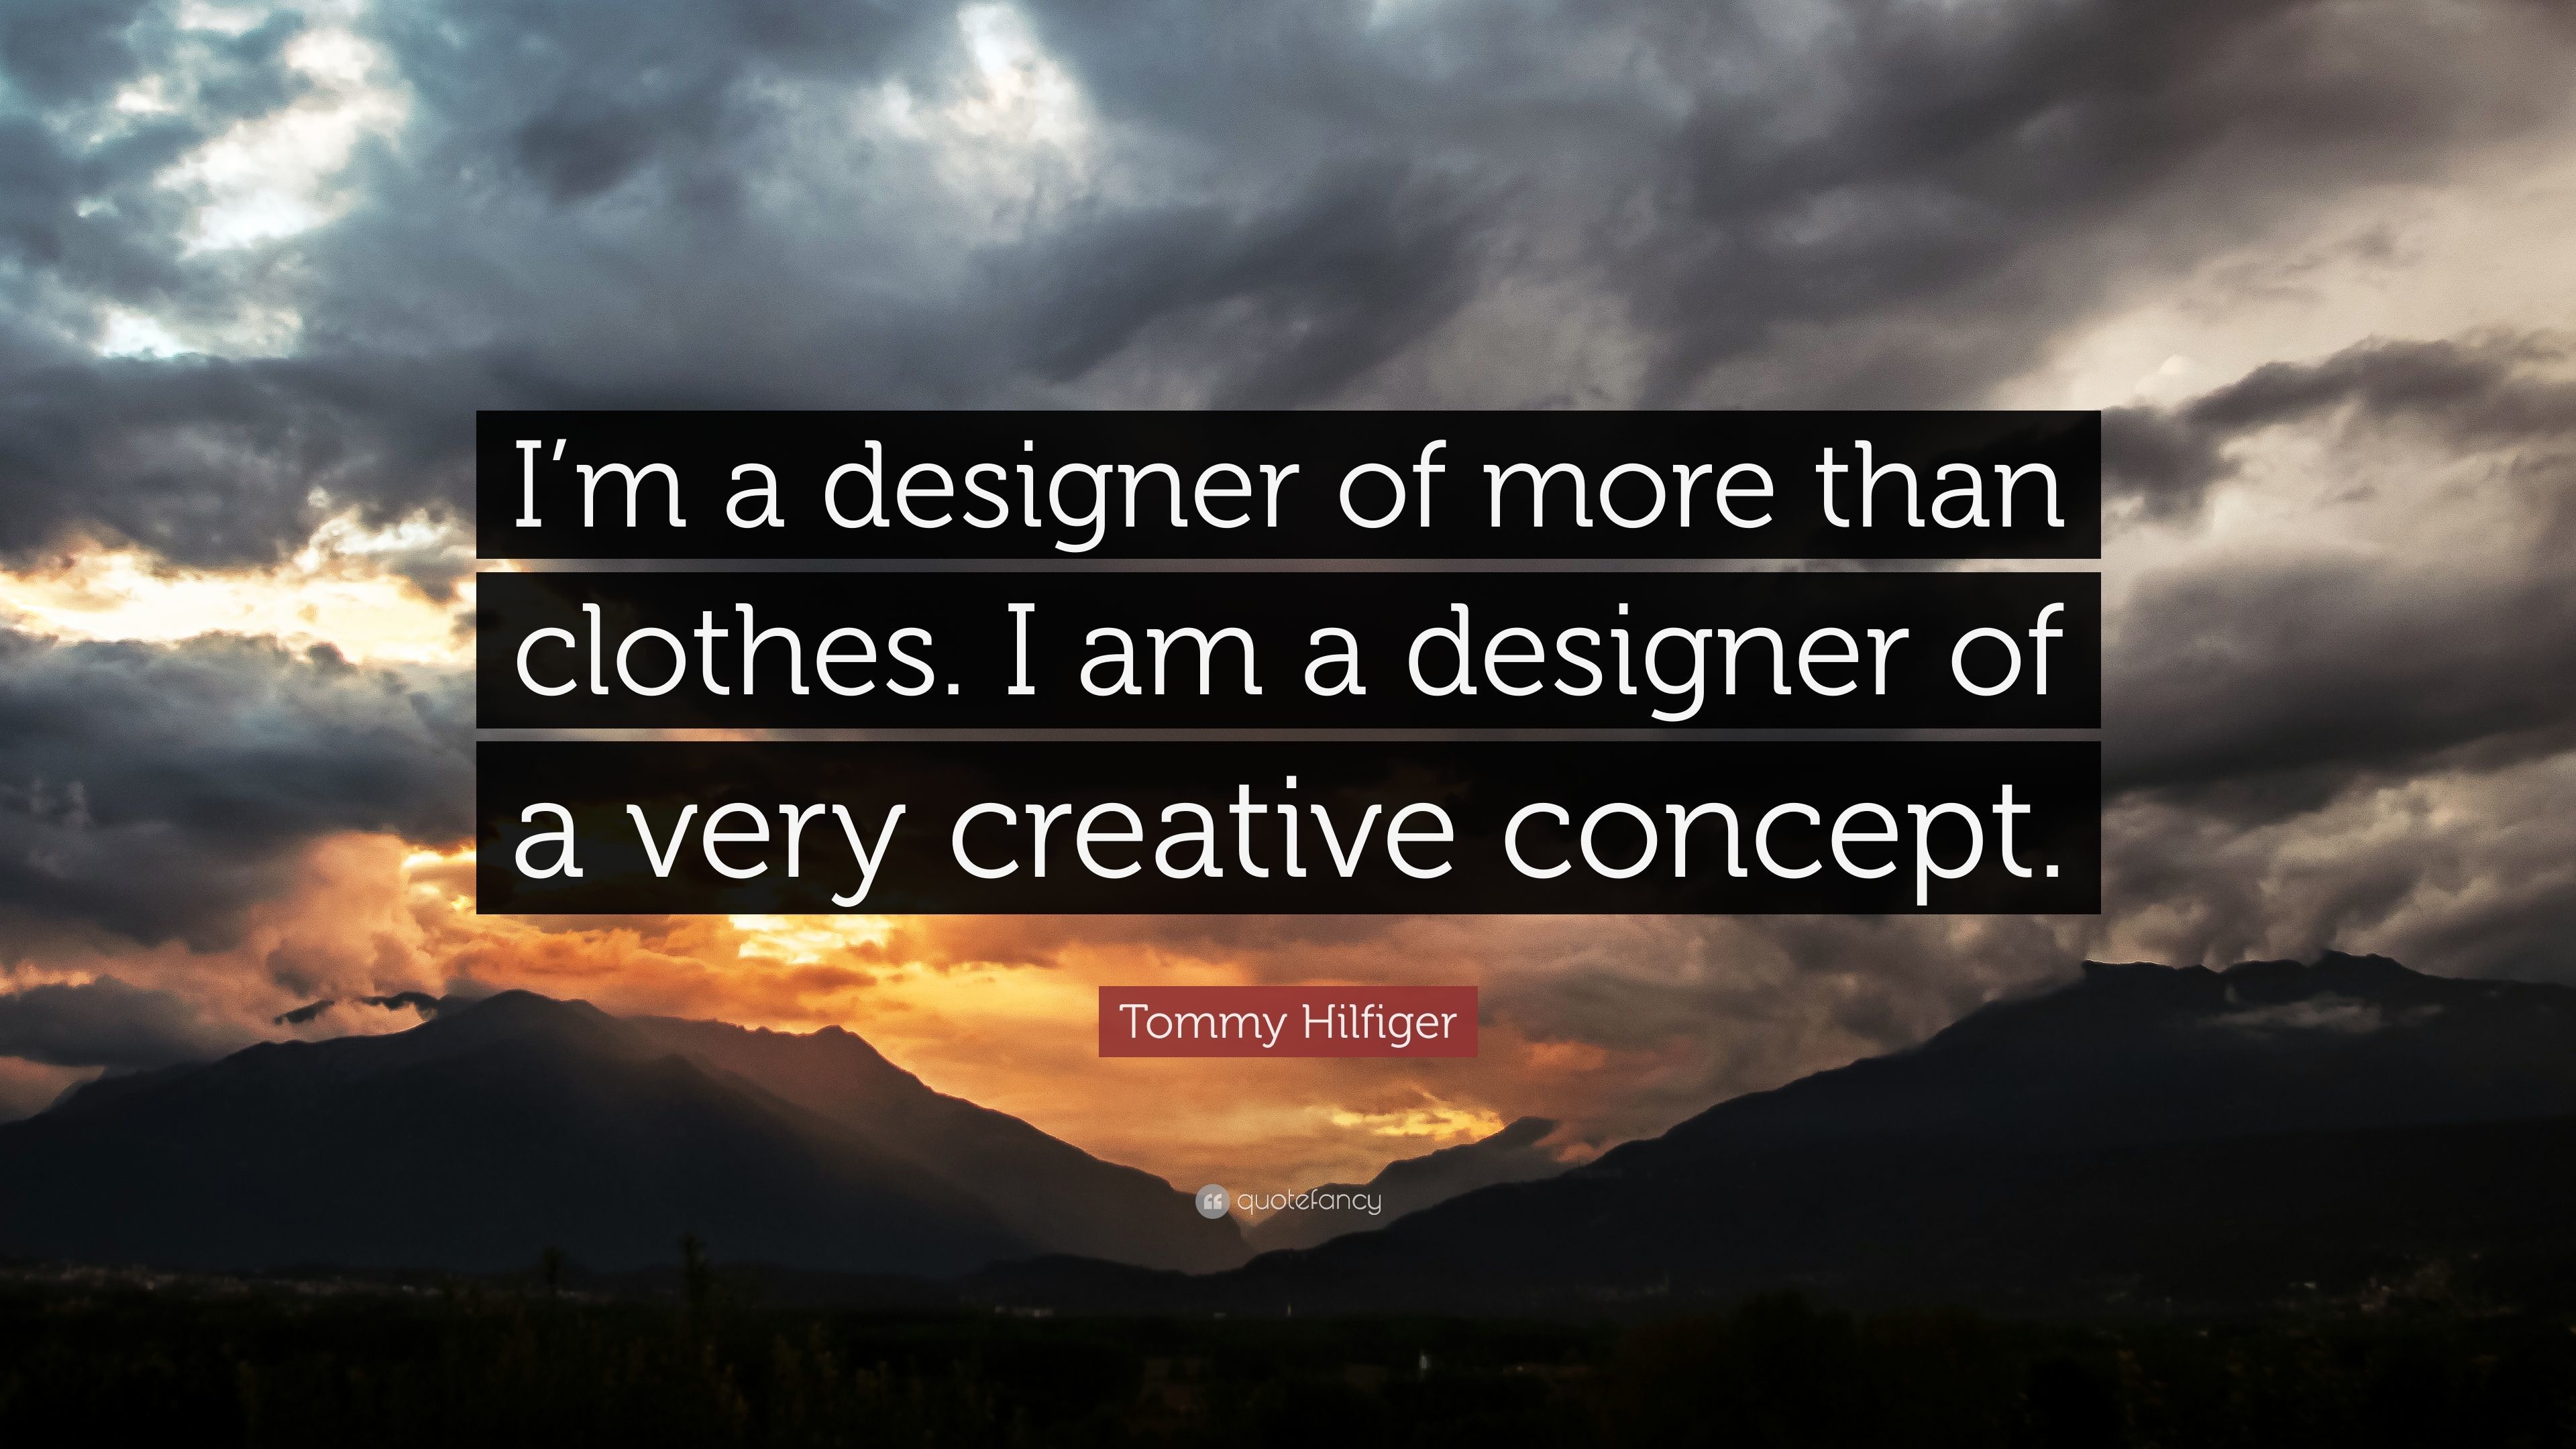 3840x2160 Tommy Hilfiger Quote: “I'm a designer of more than clothes. I